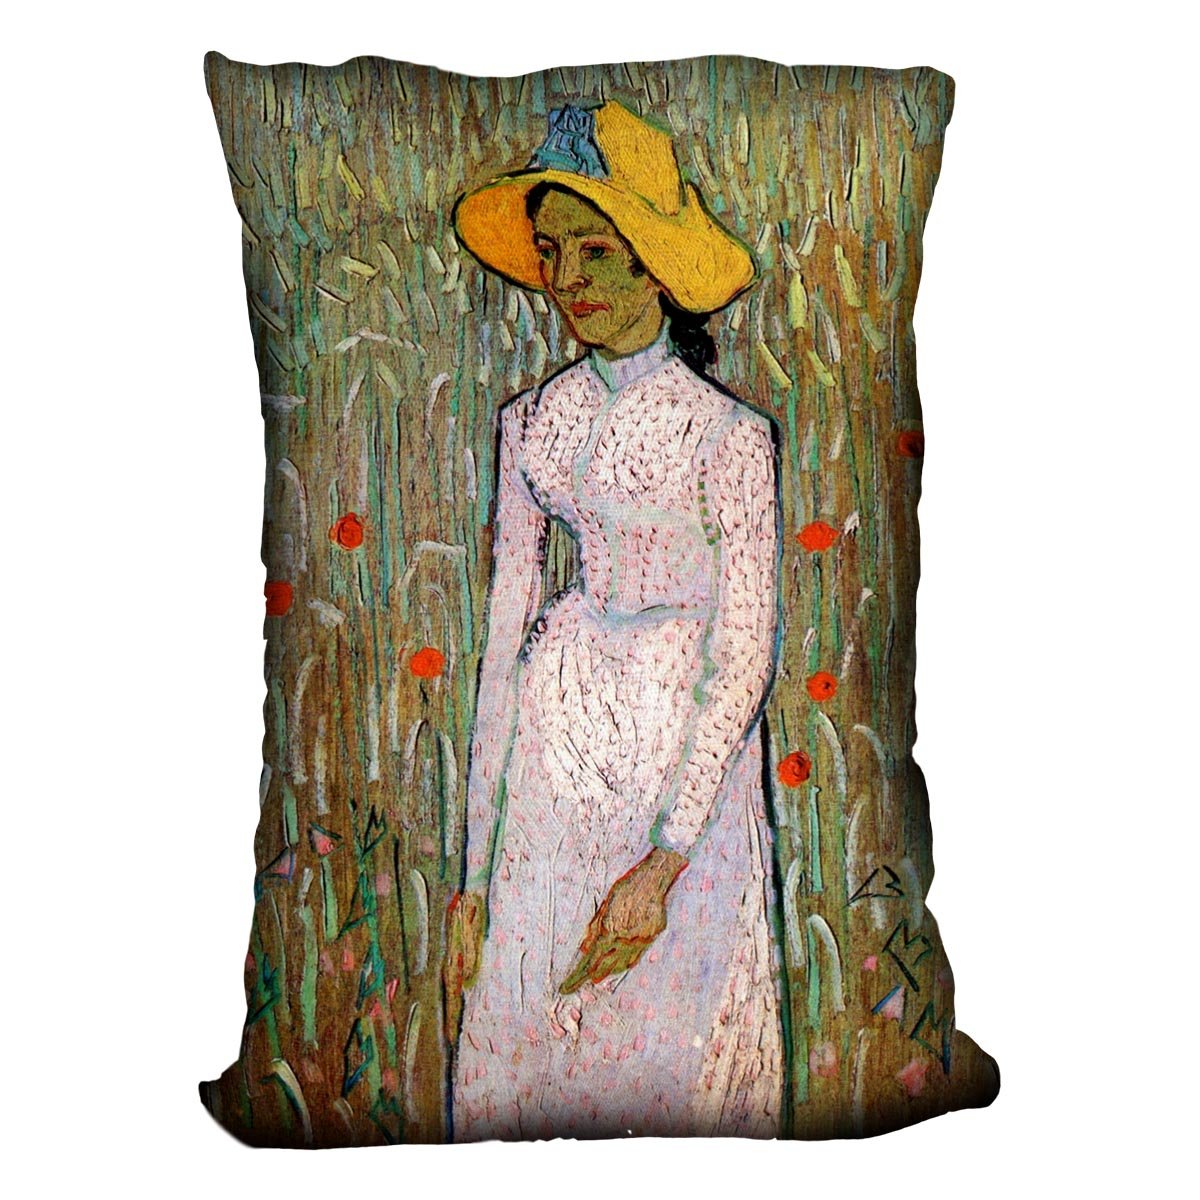 Young Girl Standing Against a Background of Wheat by Van Gogh Throw Pillow